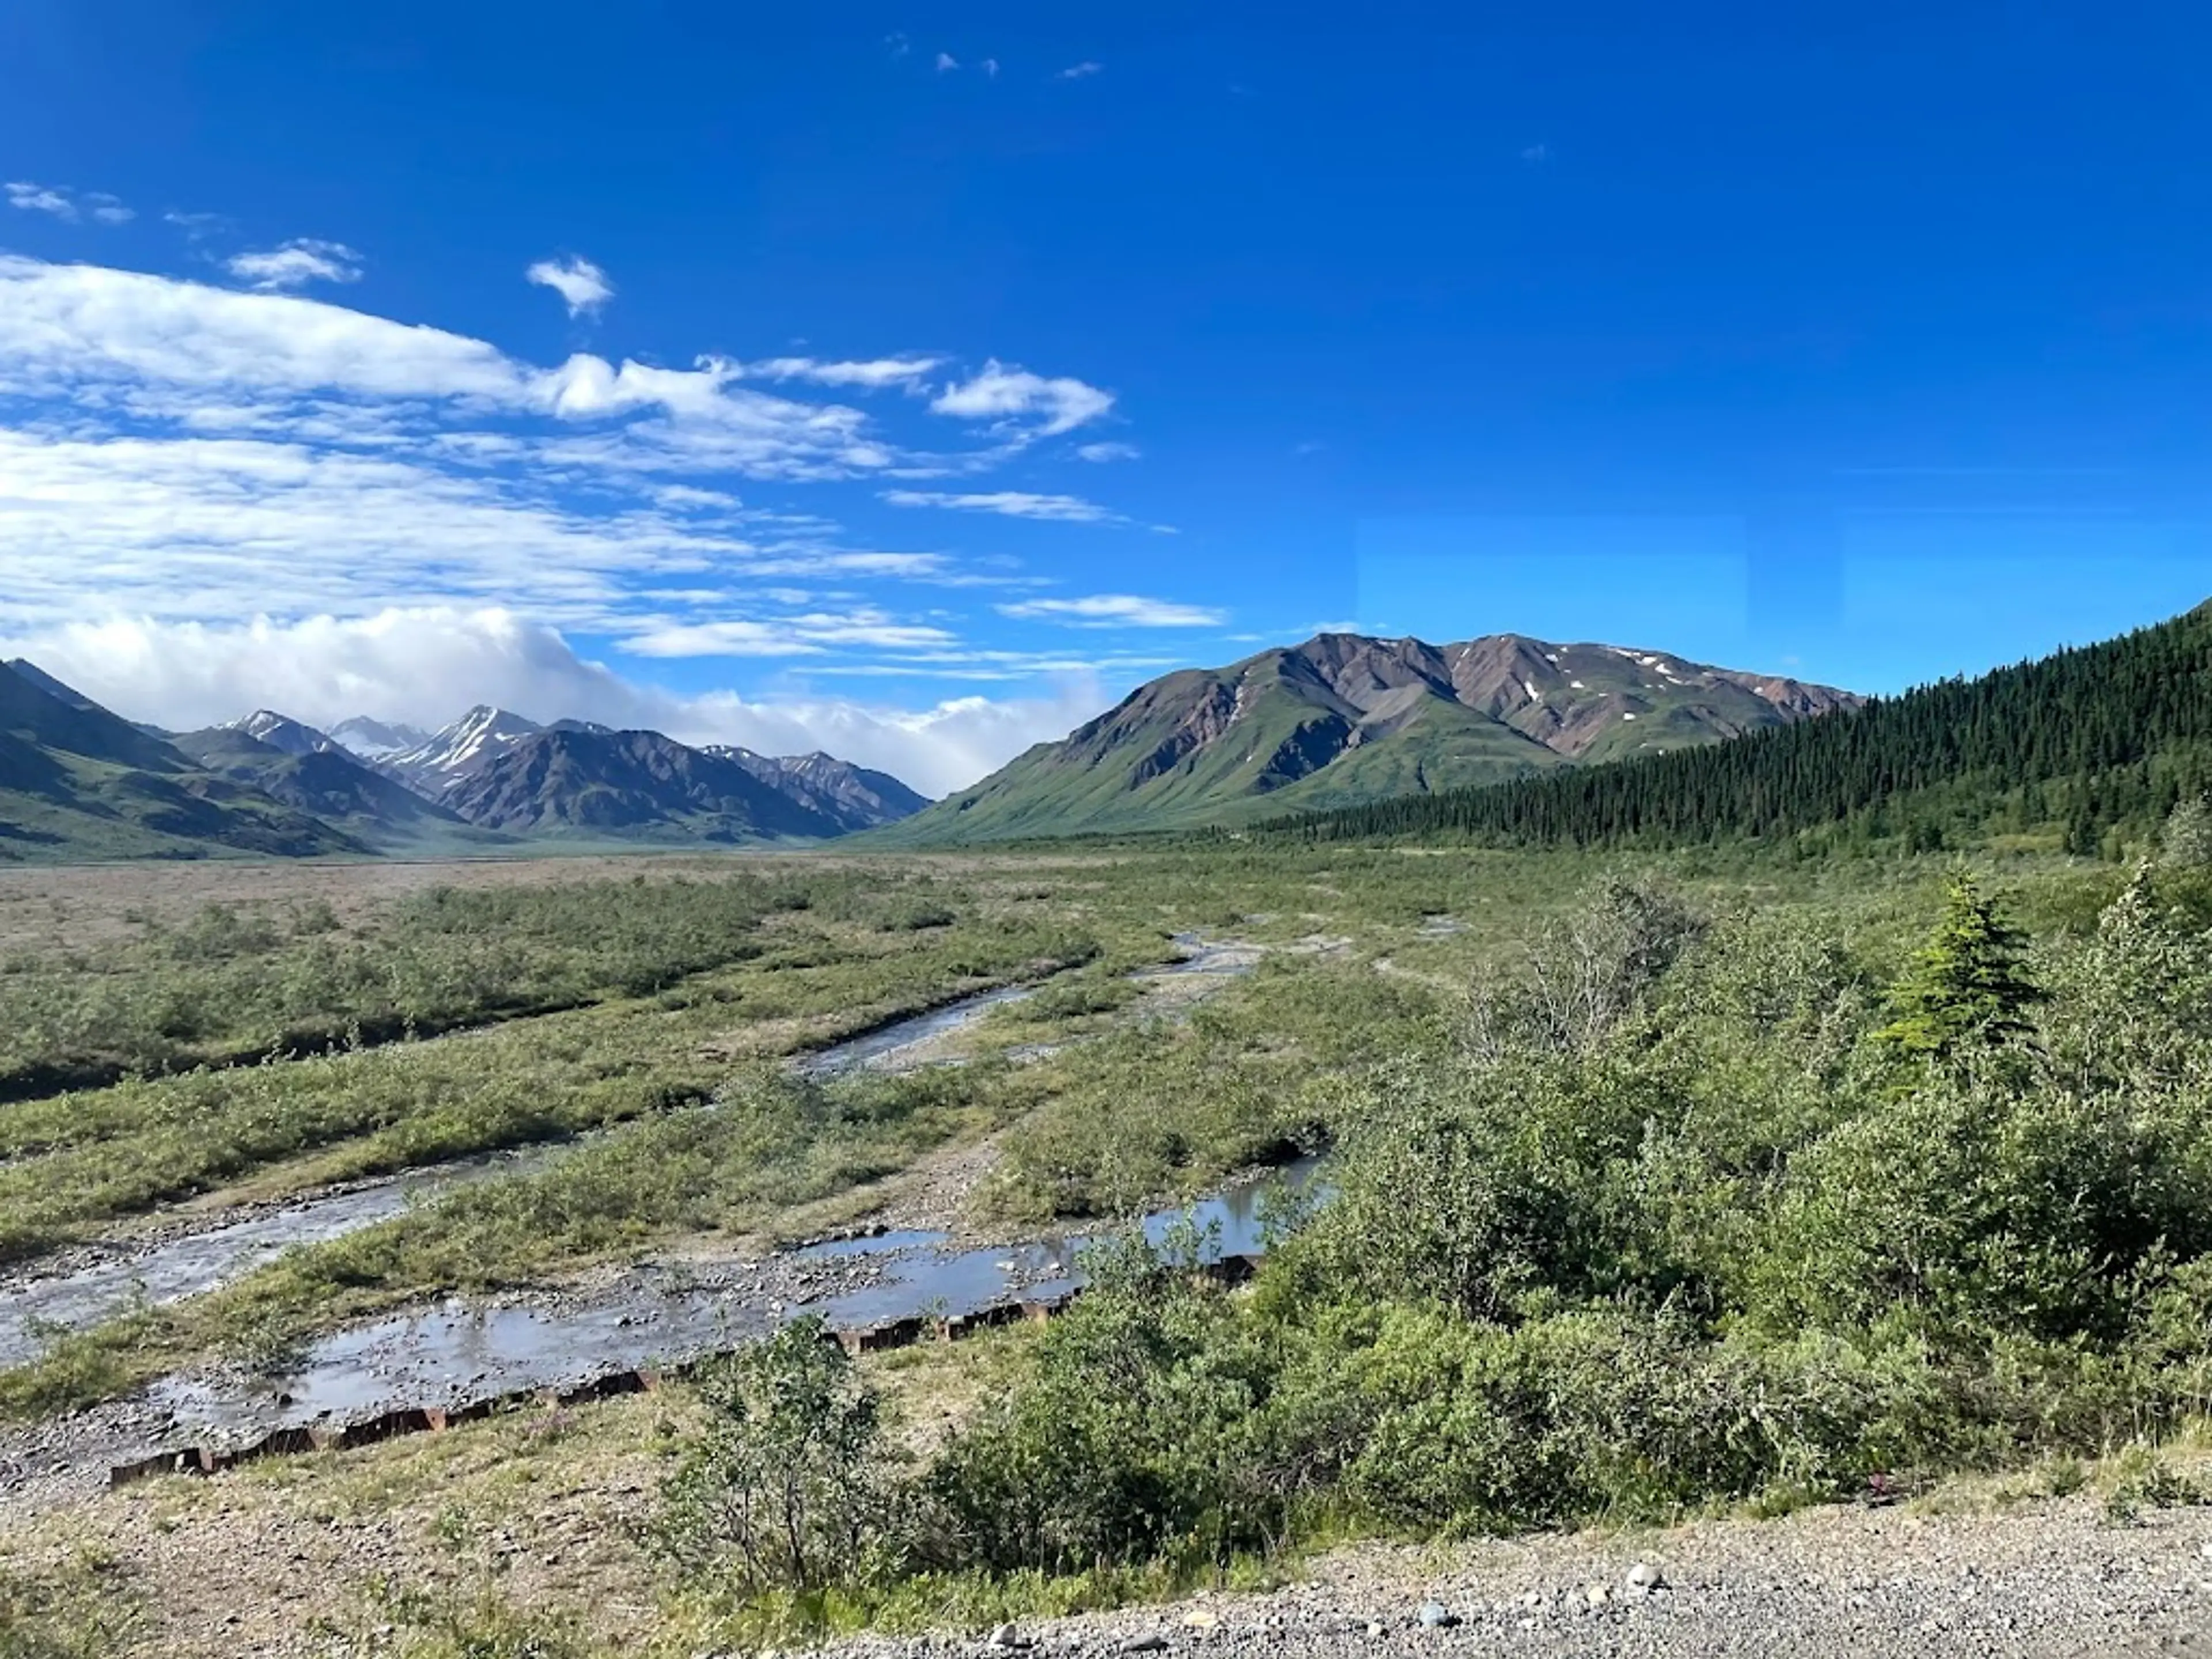 Guided tour of Denali National Park